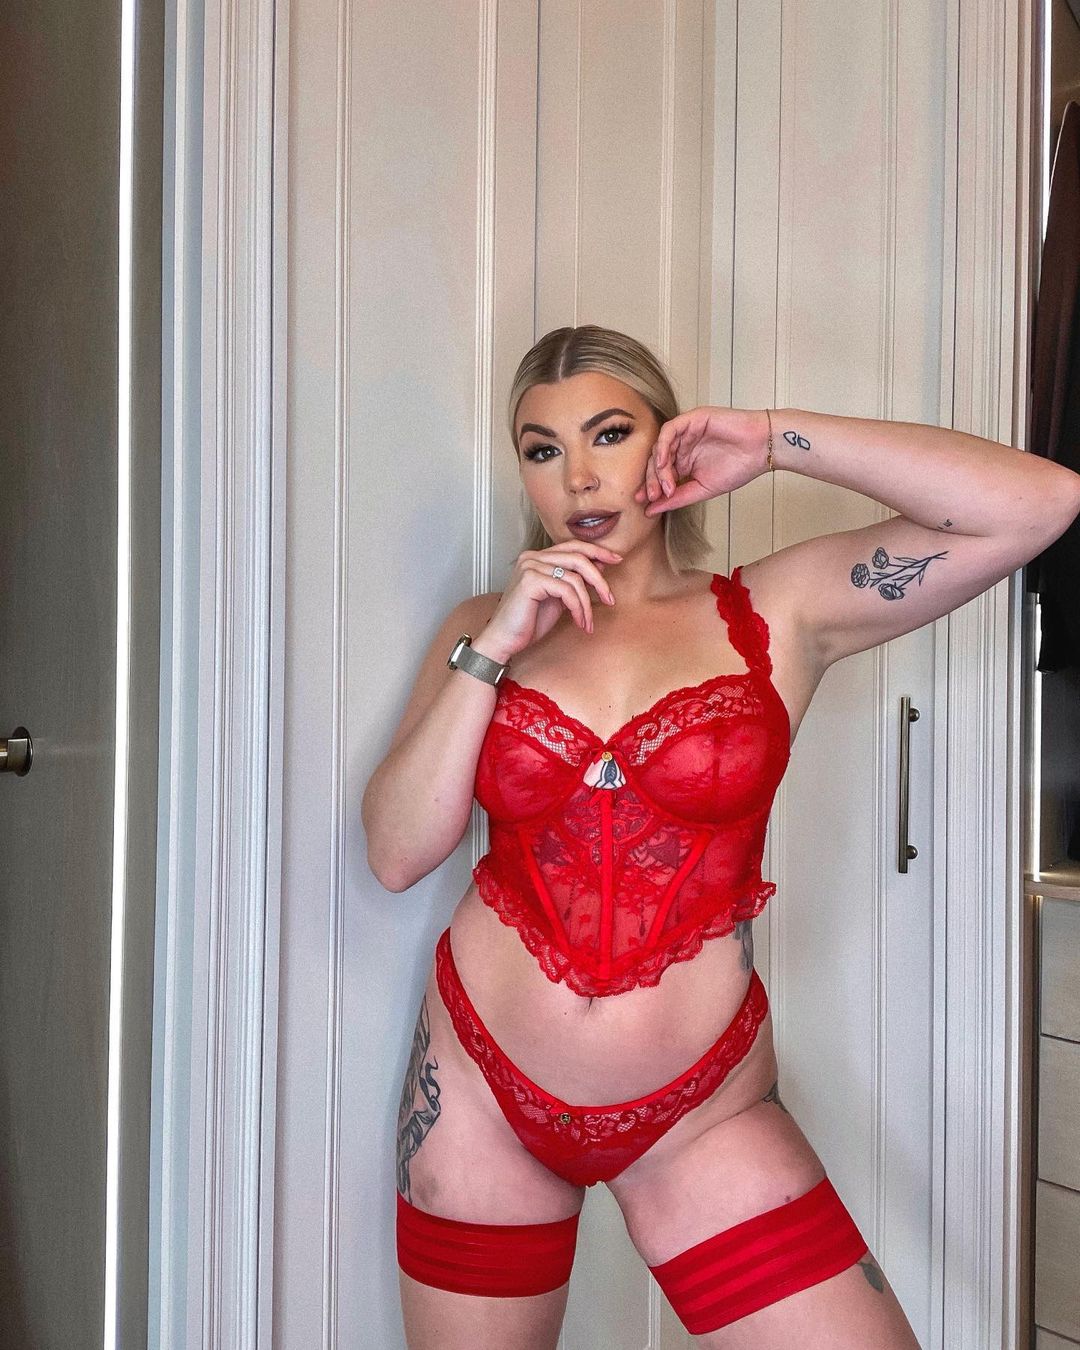 Olivia Bowen looks incredible as she poses in red lace lingerie for Valentine’s Day